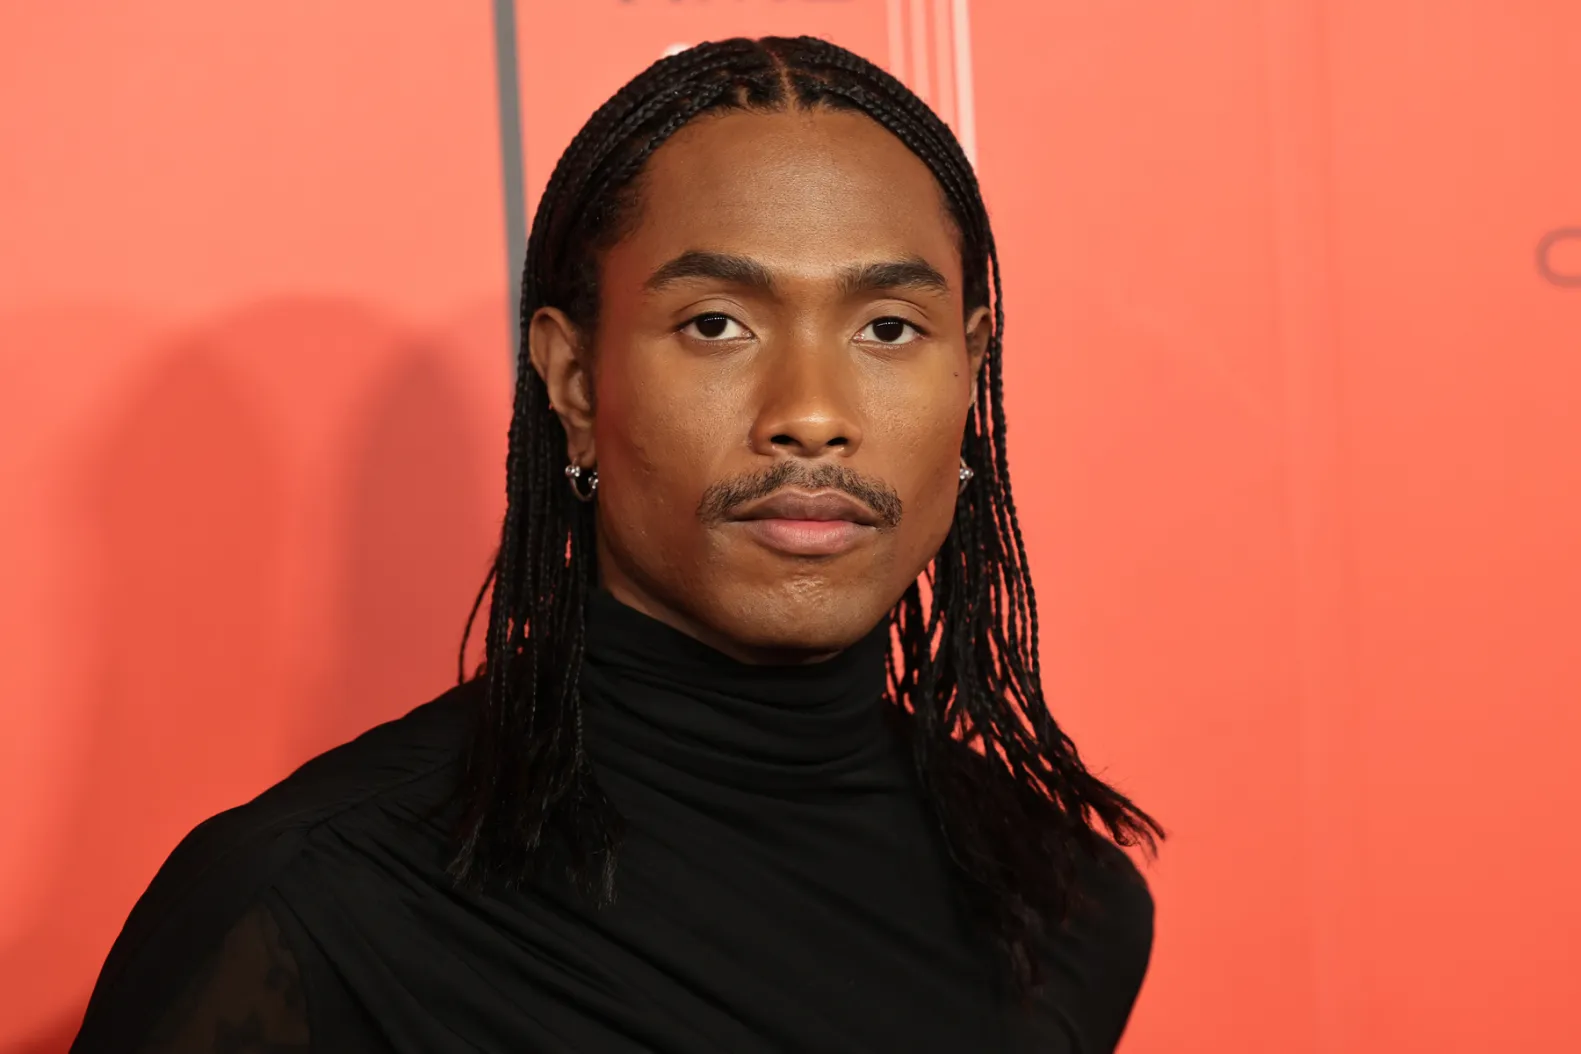 Steve Lacy Bio, Age, Career, Wiki, Physical Attributes, Girlfriend and Net Worth